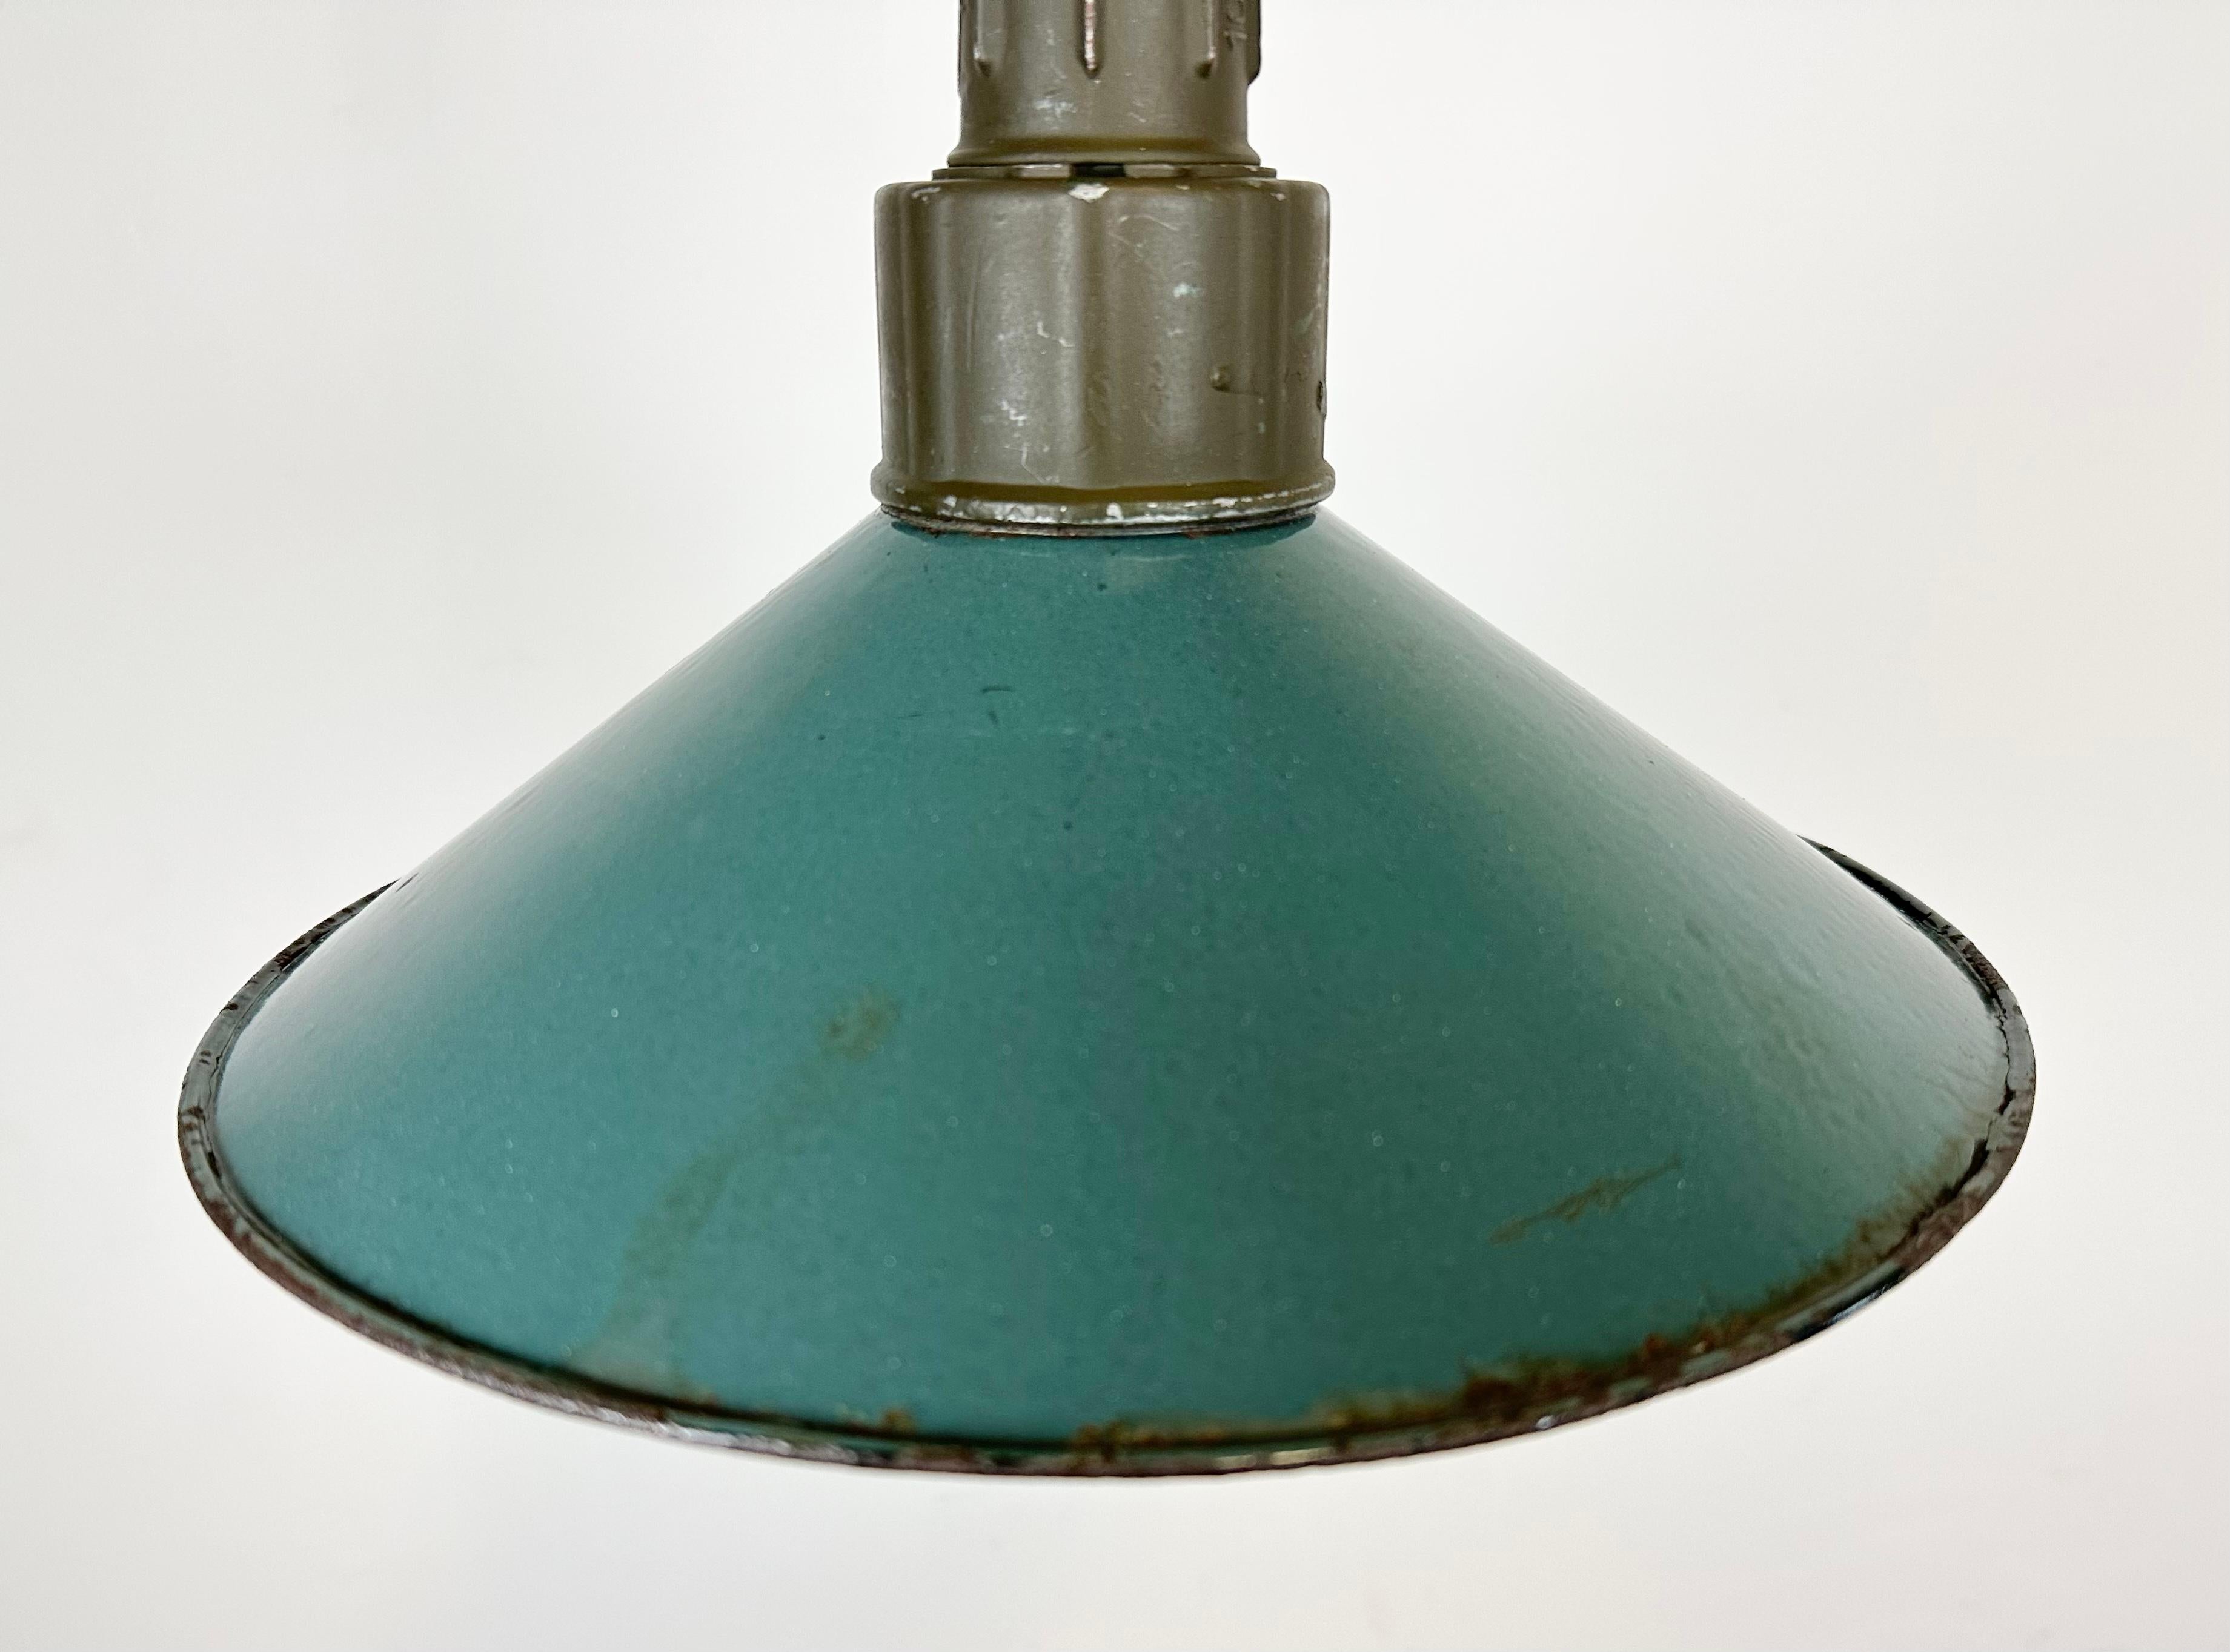 Industrial Green Enamel Factory Pendant Lamp with Cast Aluminium Top, 1960s In Good Condition For Sale In Kojetice, CZ